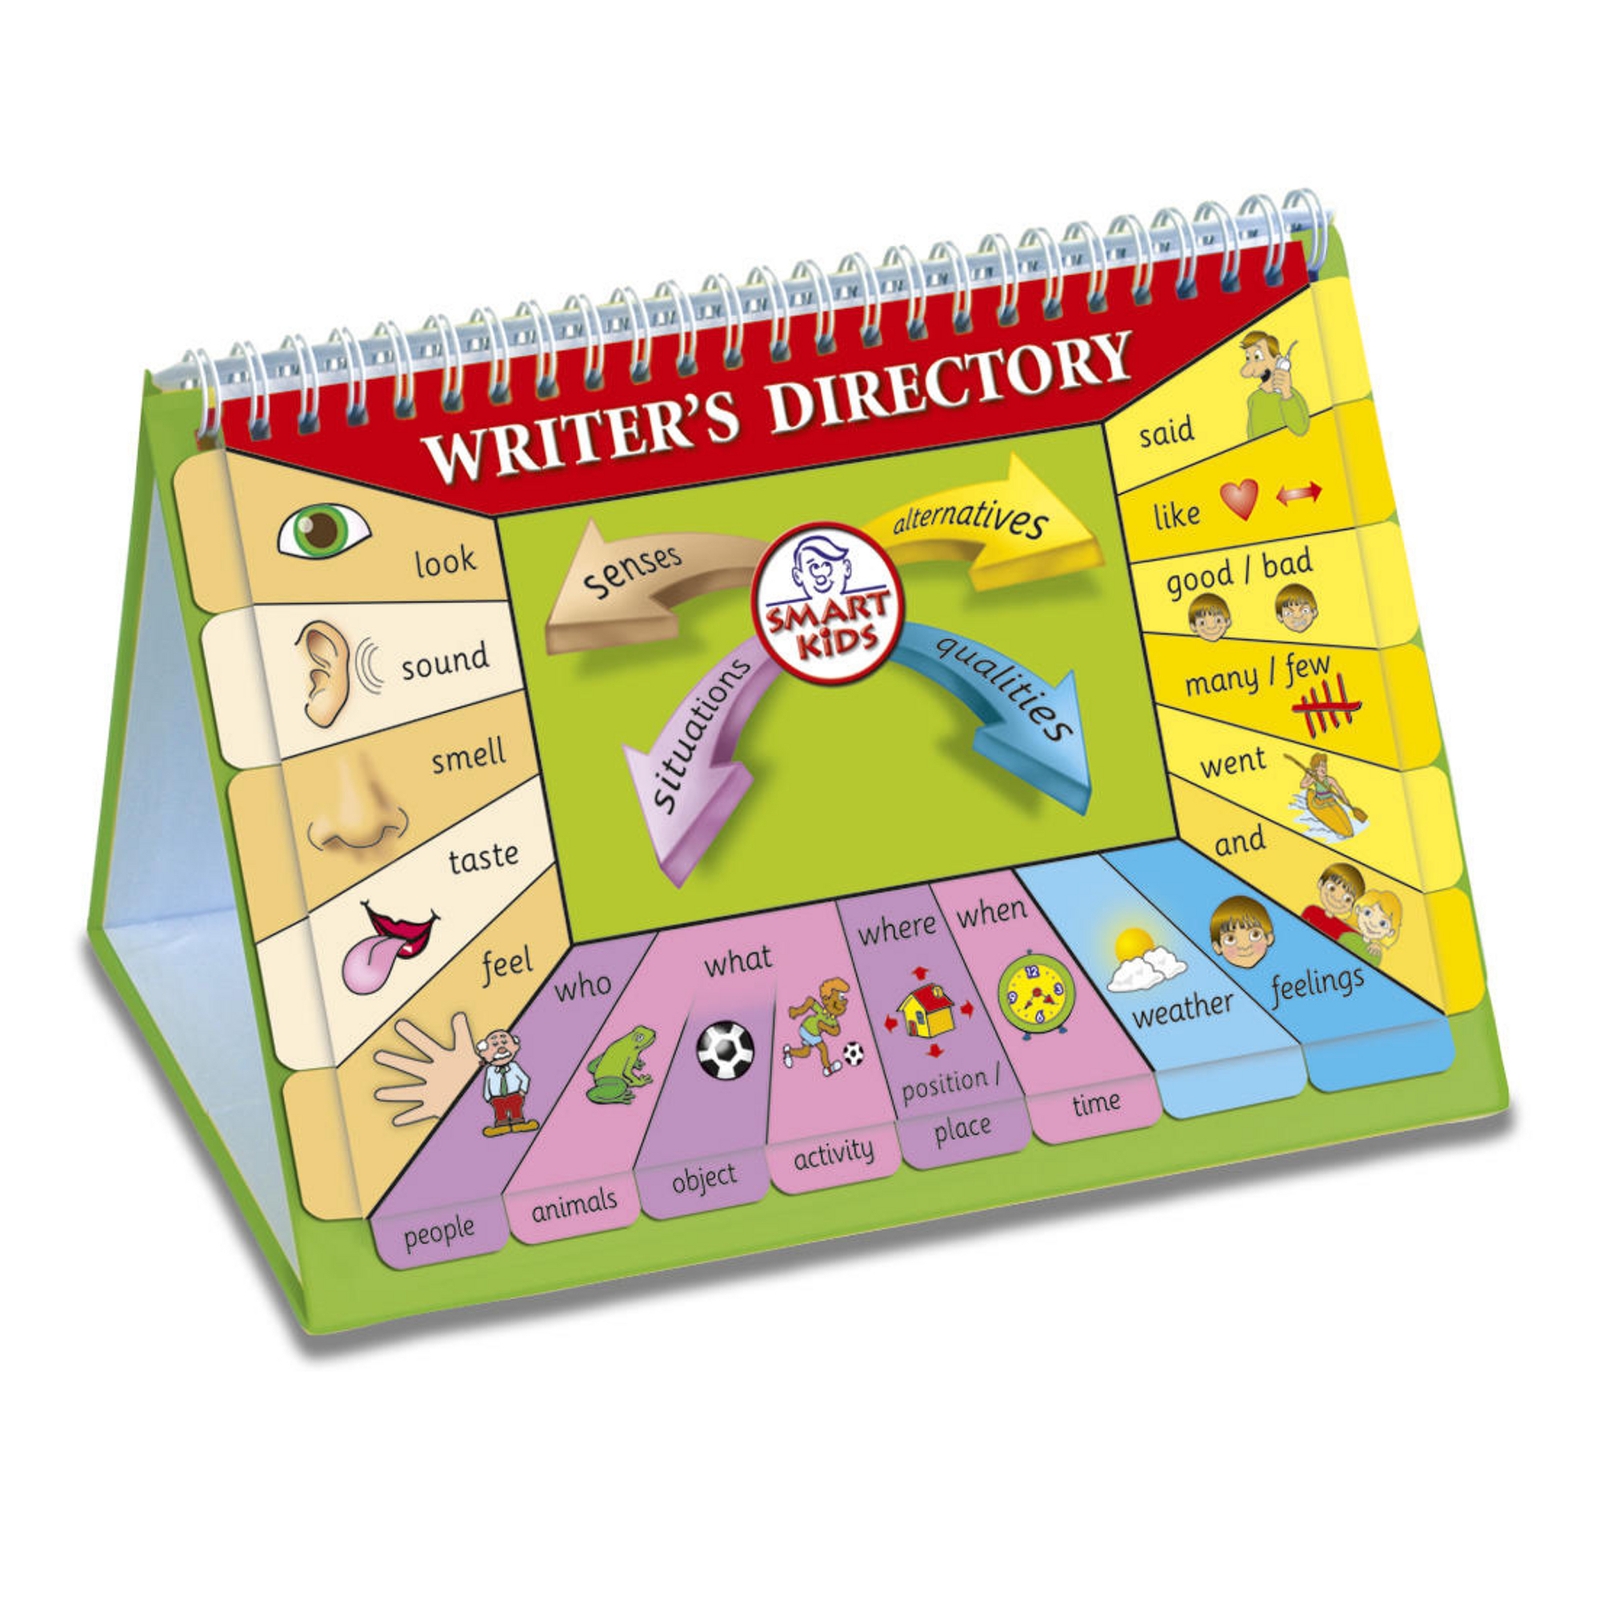 Writer's Directory & Creative Writing Directory Multibuy Offer  - Pack of 2